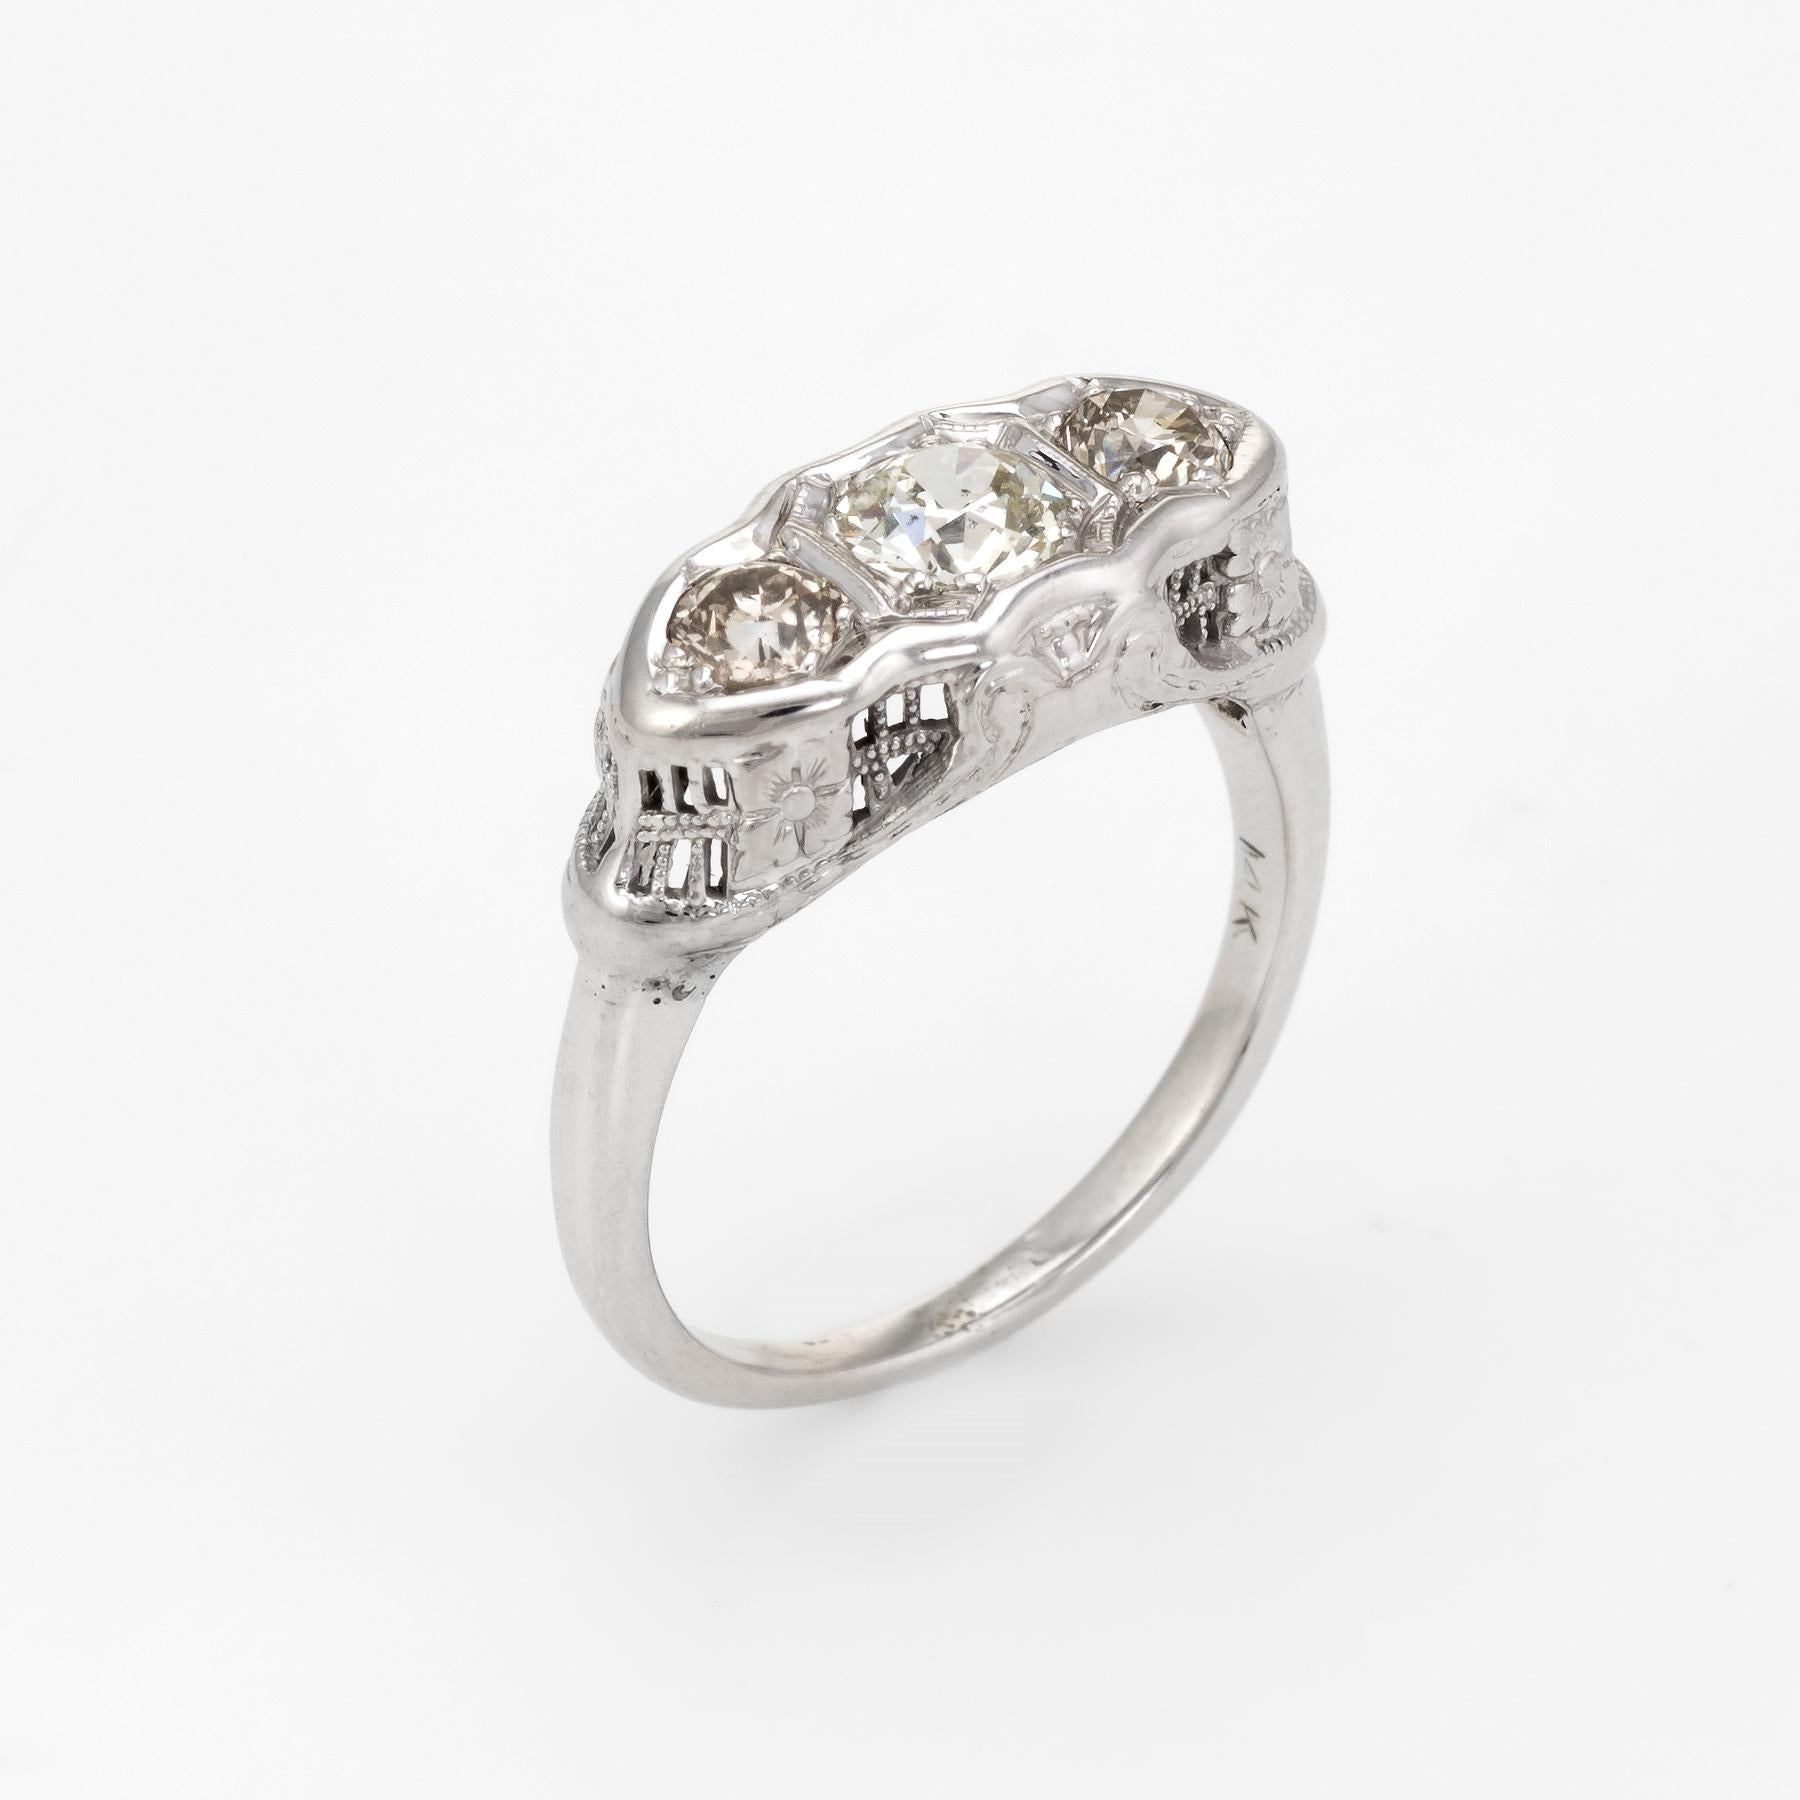 Finely detailed vintage Art Deco era 3 stone diamond ring (circa 1920s to 1930s), crafted in 14 karat white gold. 

Centrally mounted estimated 0.45 carat old European cut diamond is accented with two estimated 0.15 carat old European cut diamonds.